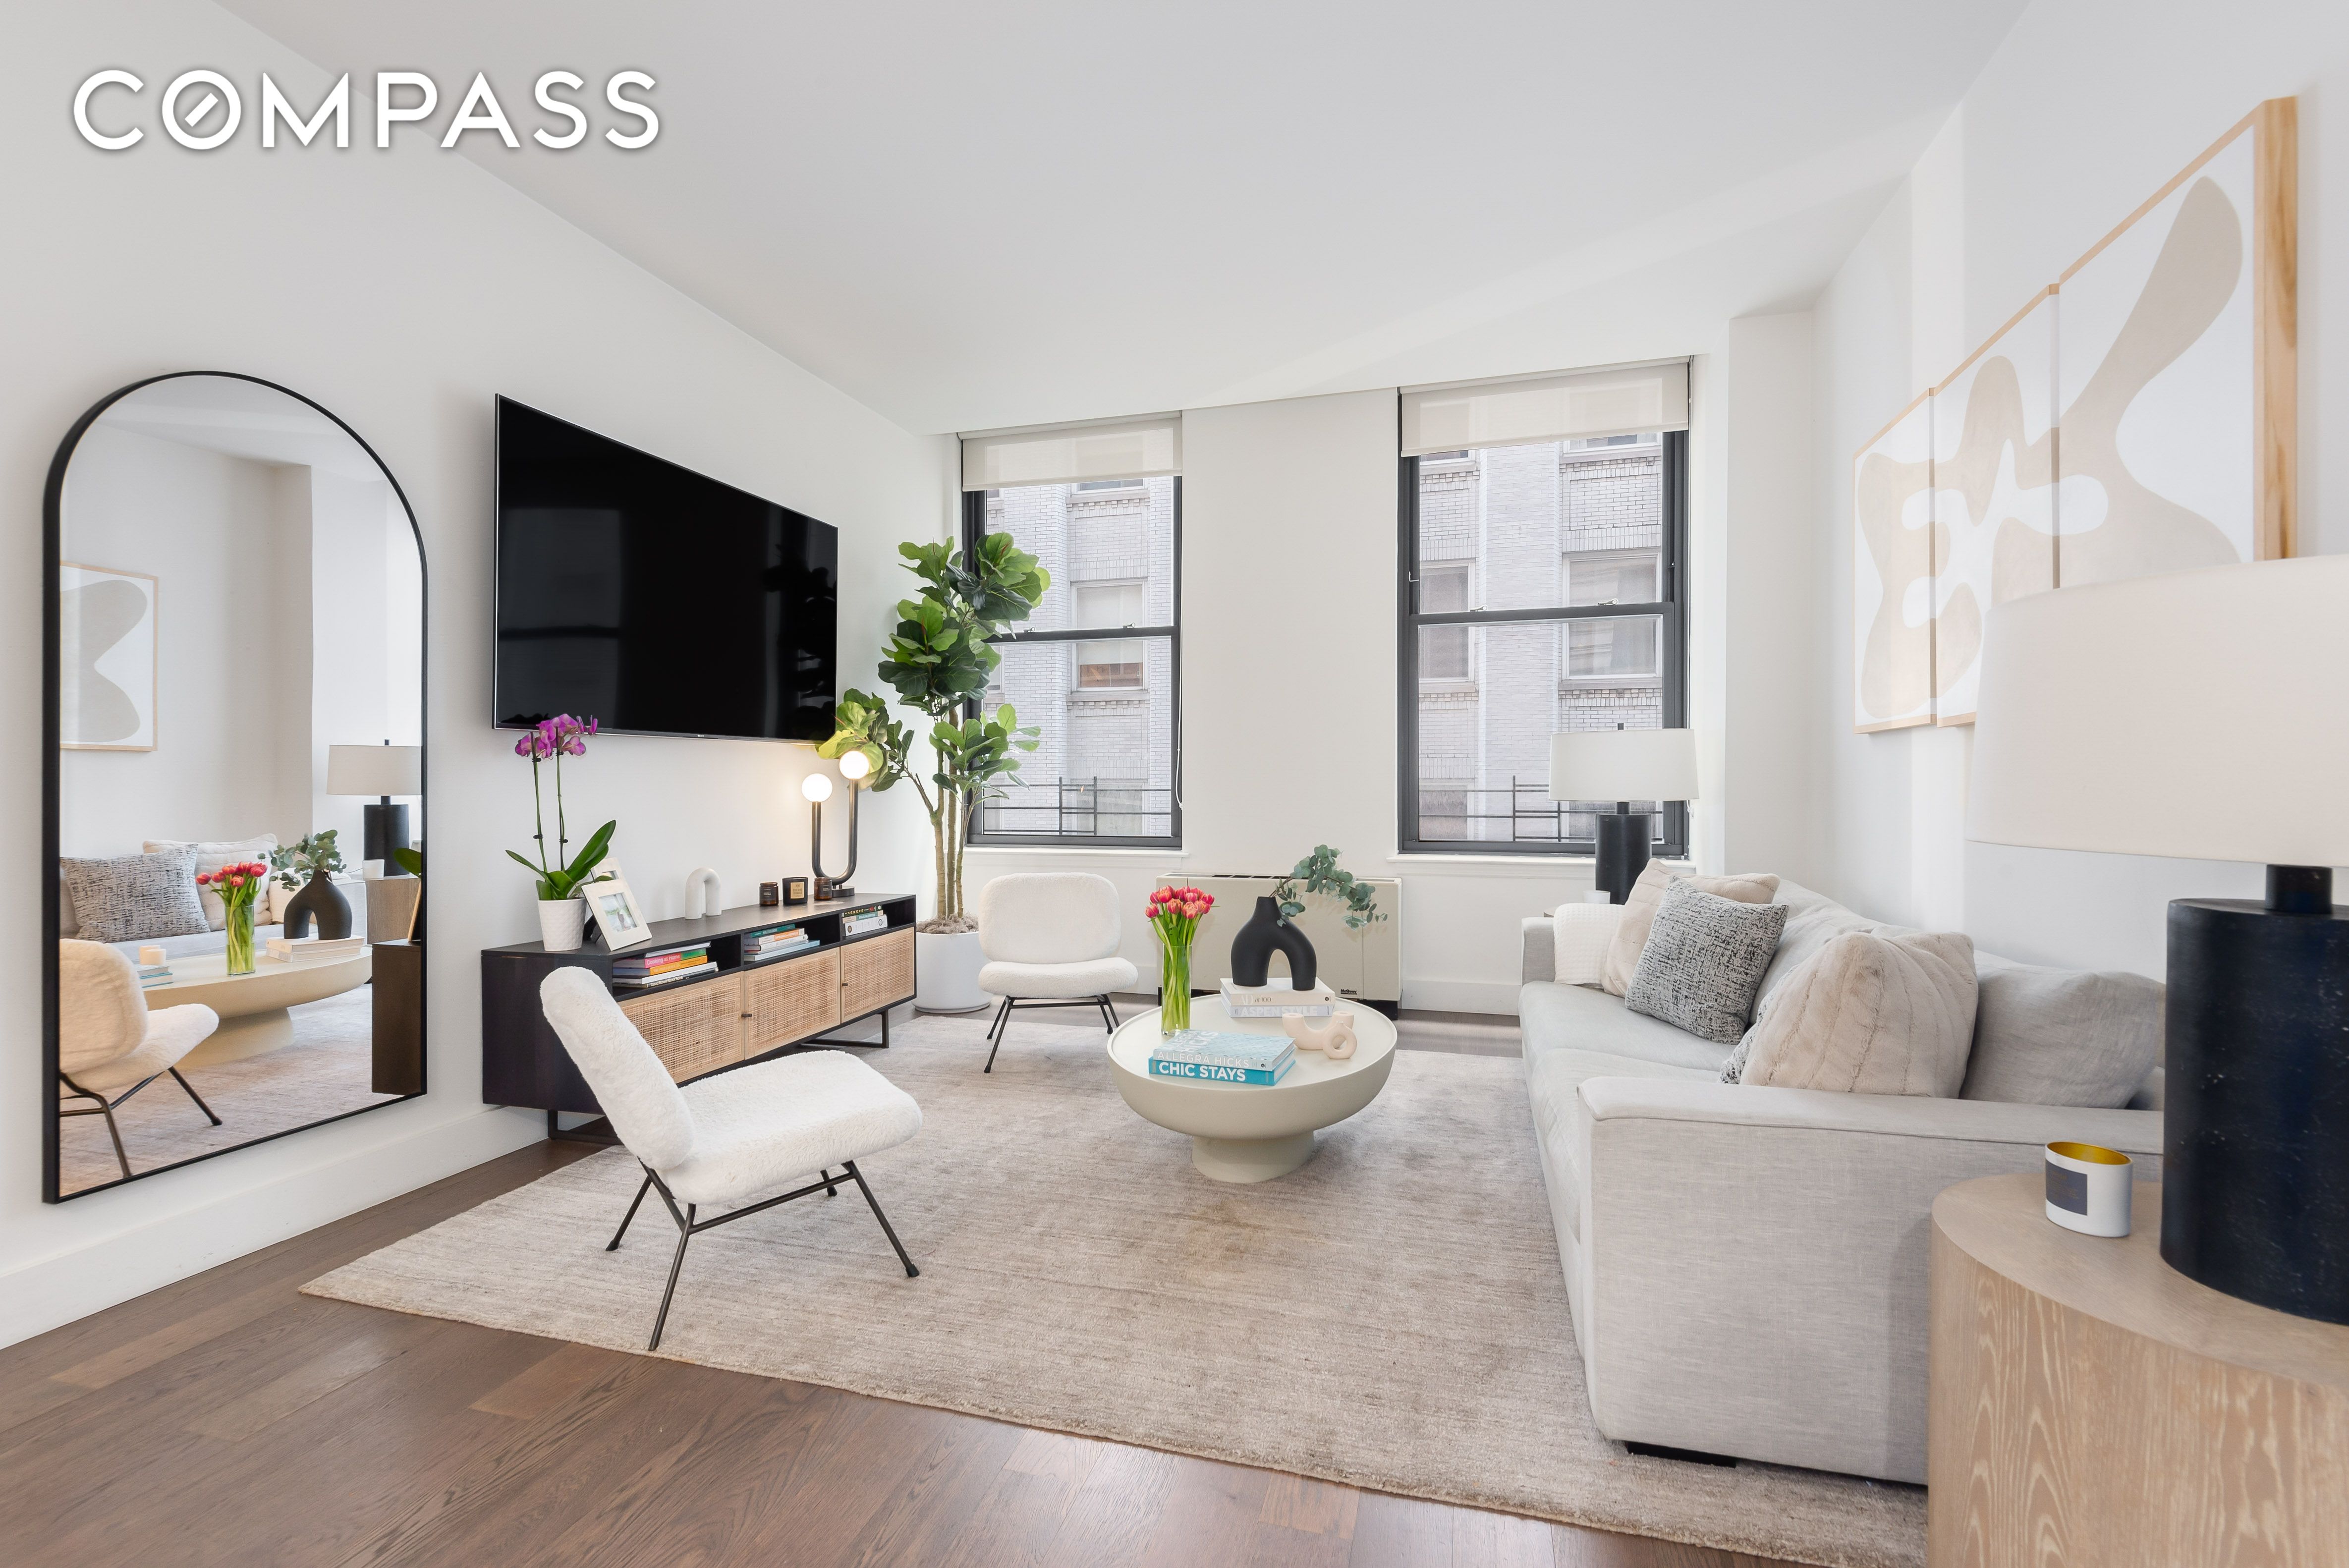 25 Broad Street 14J, Financial District, Downtown, NYC - 2 Bedrooms  
2 Bathrooms  
4 Rooms - 